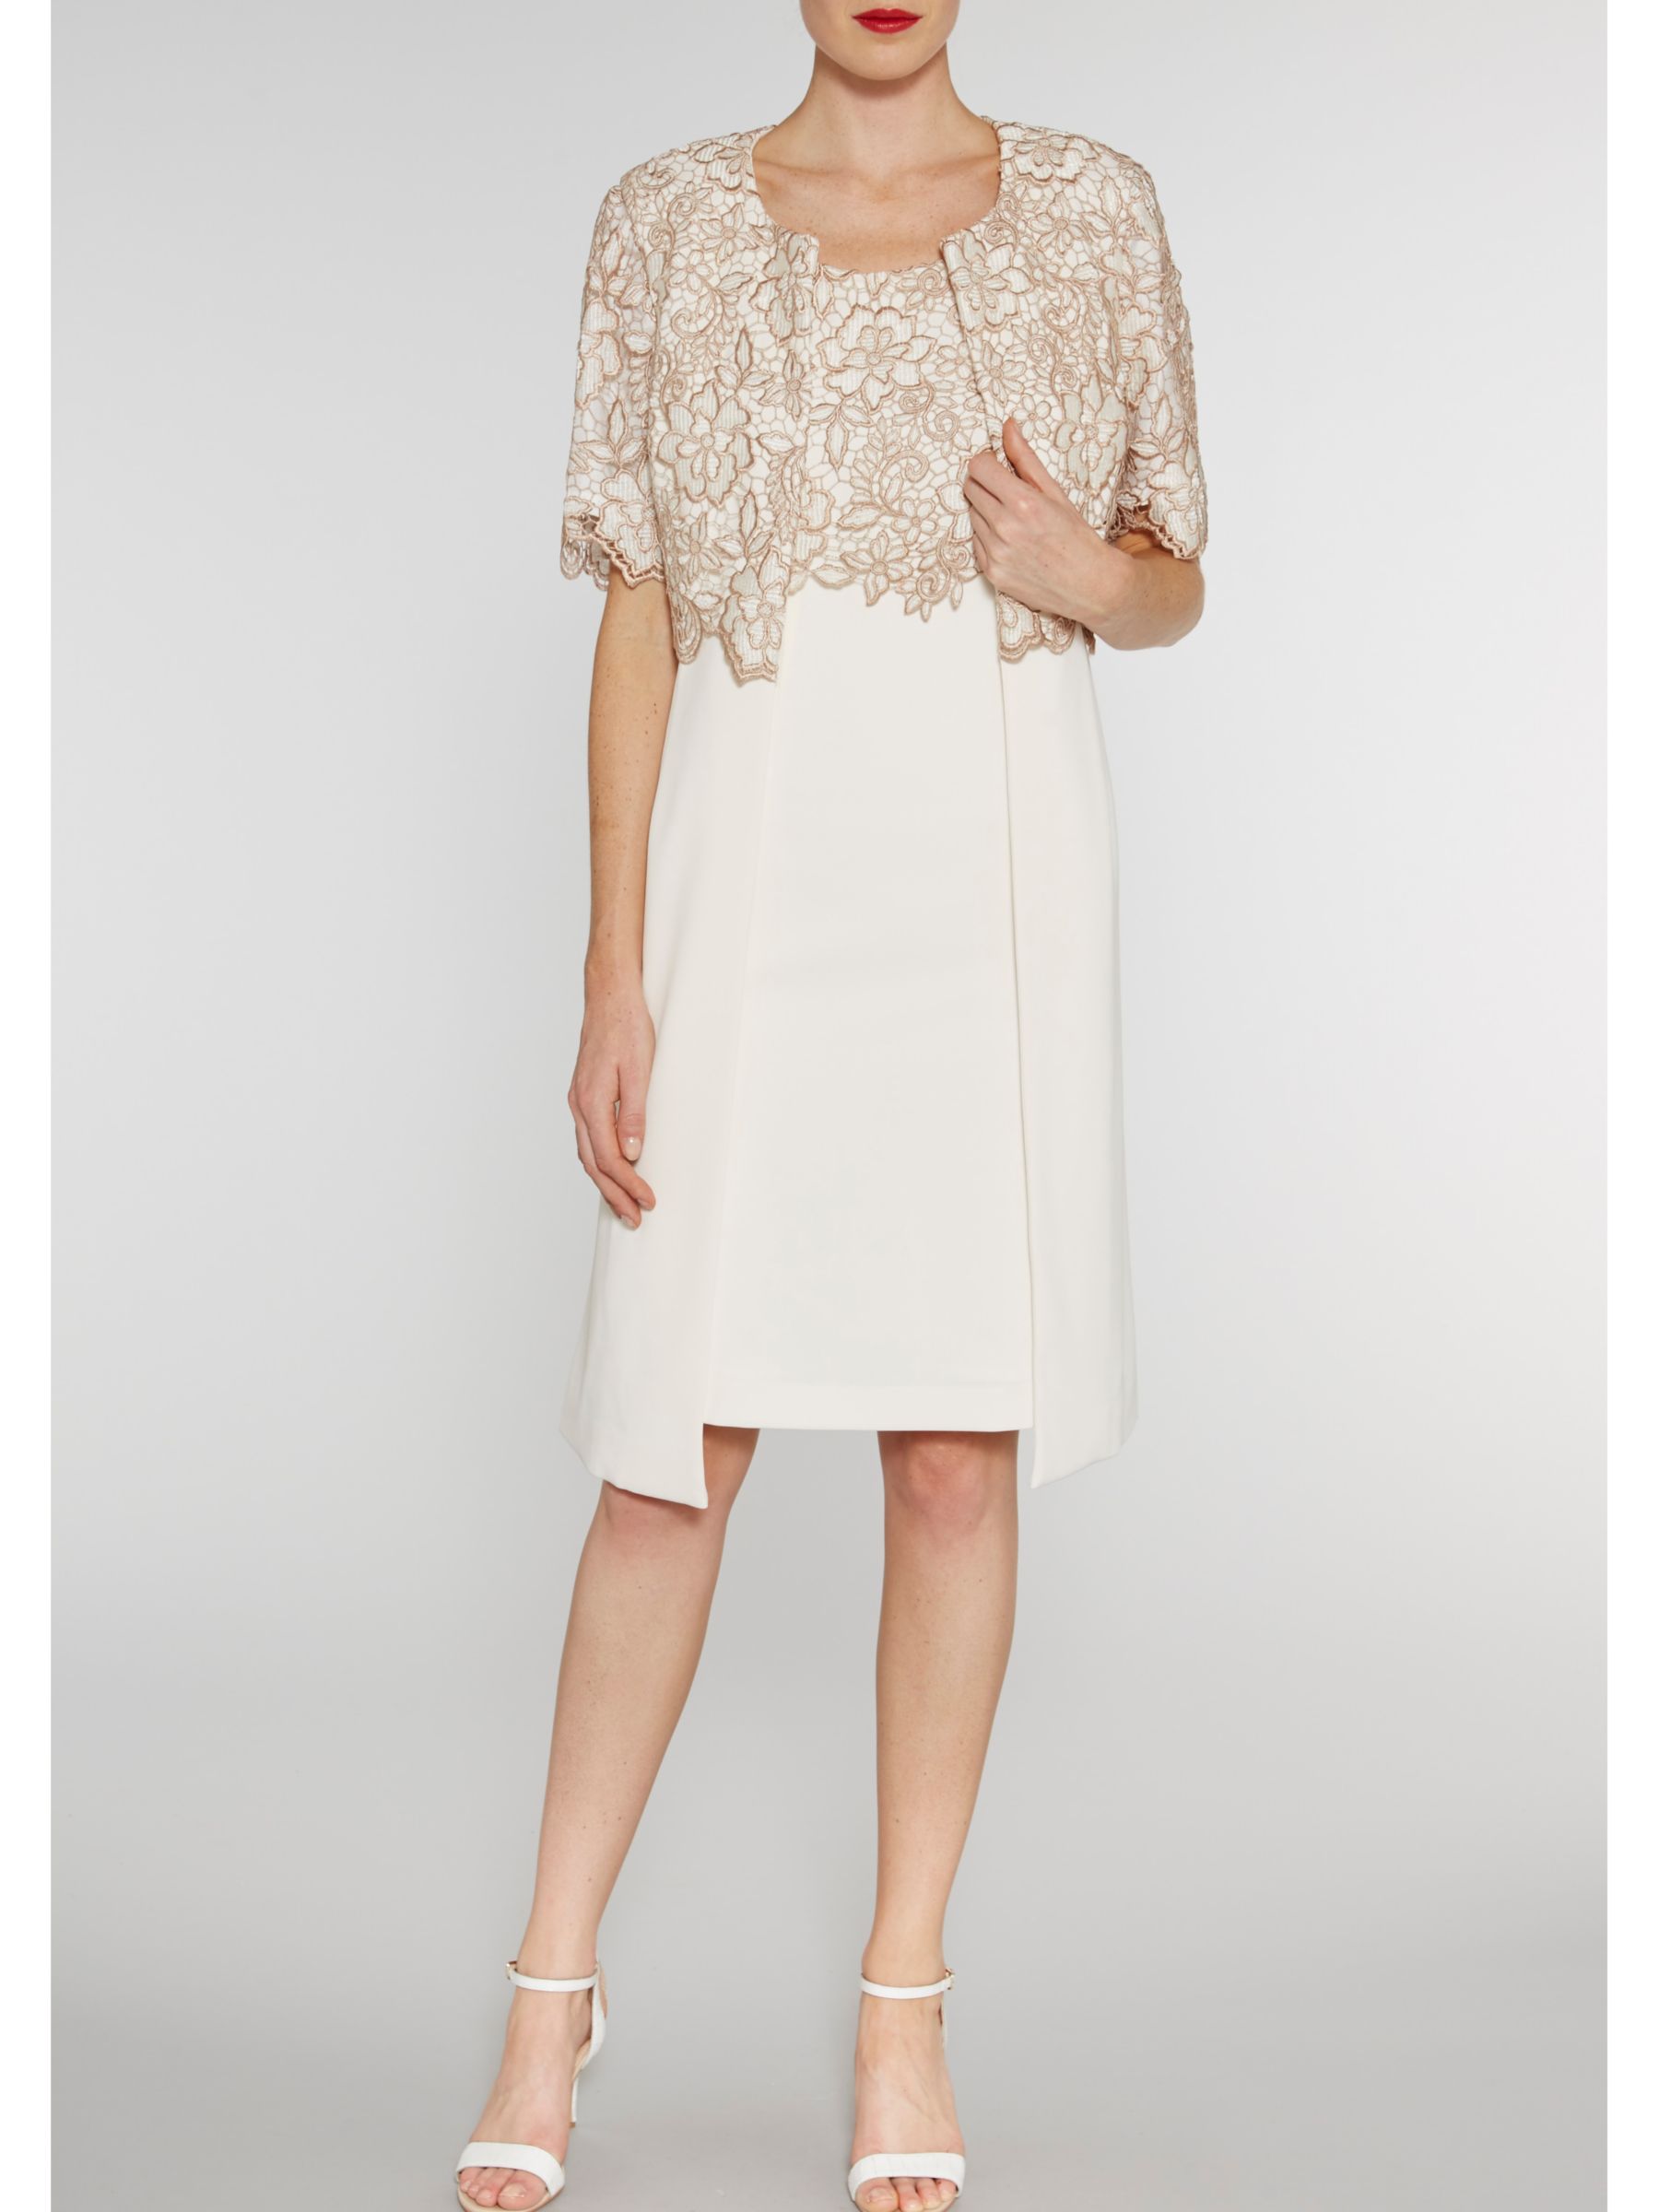 Gina Bacconi Two Tone Guipure Lace Coat And Dress at John Lewis & Partners